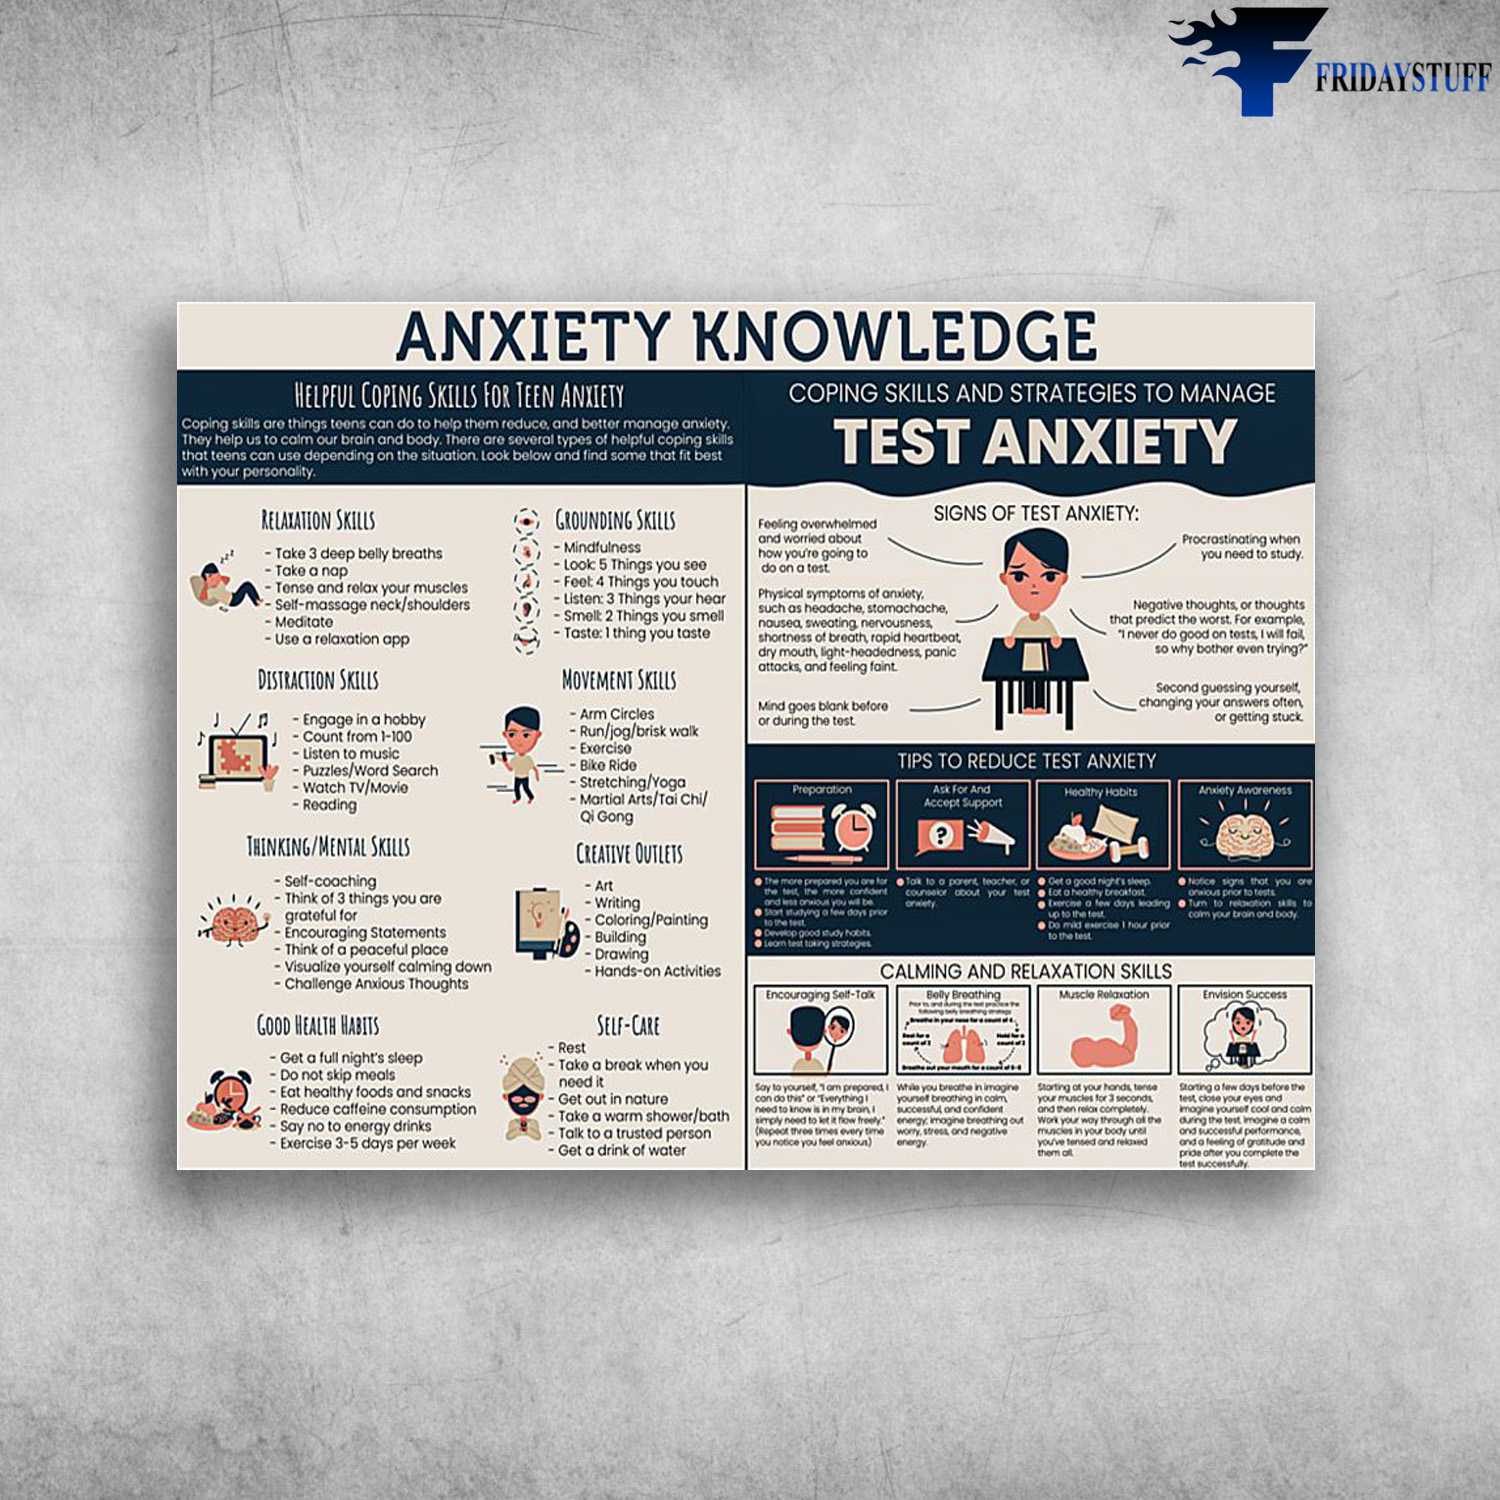 Anxiety Knowledge, Helpful Coping Skills For Teen Anxiety, Coping Skills And Strategies To Manage, Test Anxiety, Signs Of Test Anxiety, Tips To Reduce Test Anxiety, Calming And Relaxation Skills